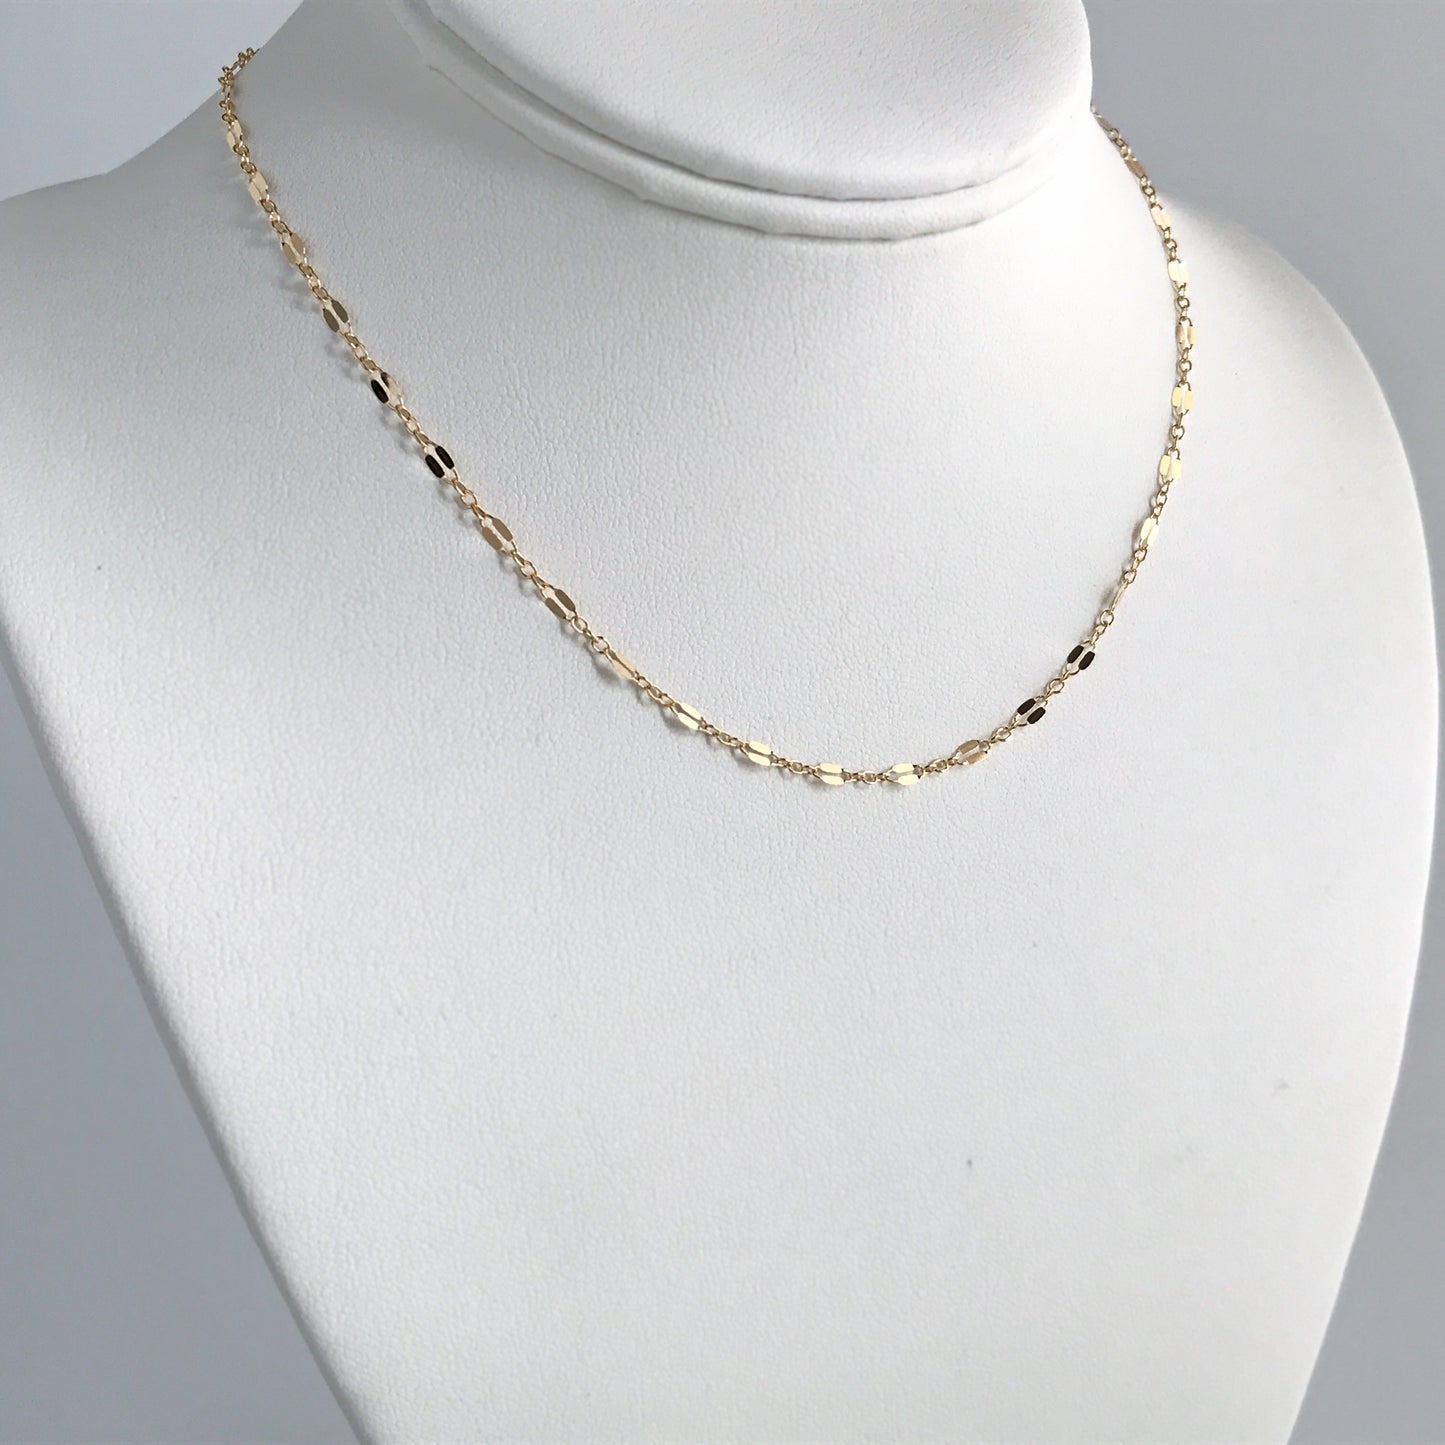 Simple Lace Chain Adjustable Choker Necklace